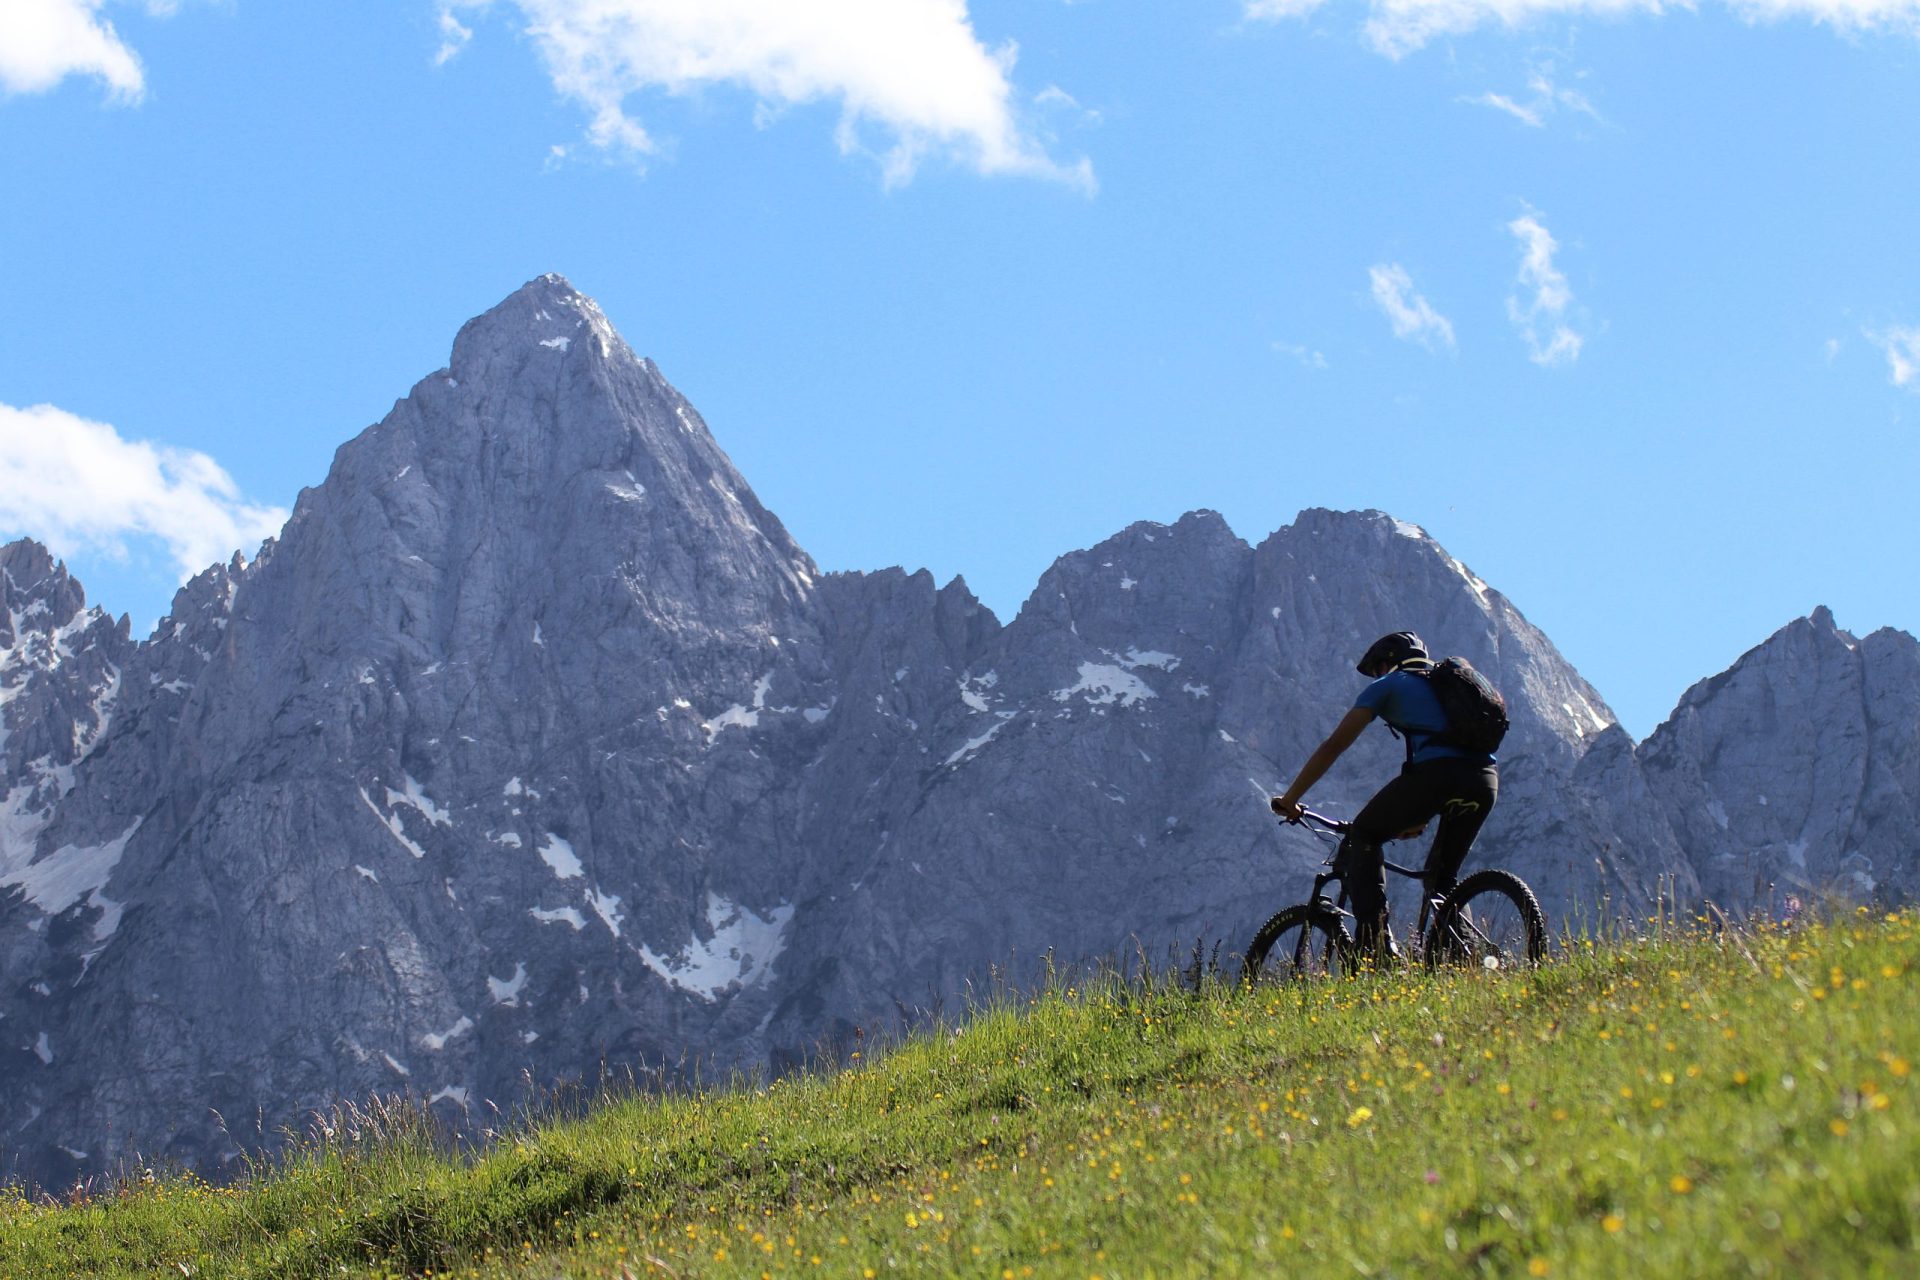 Biking with the view of the Julian Alps